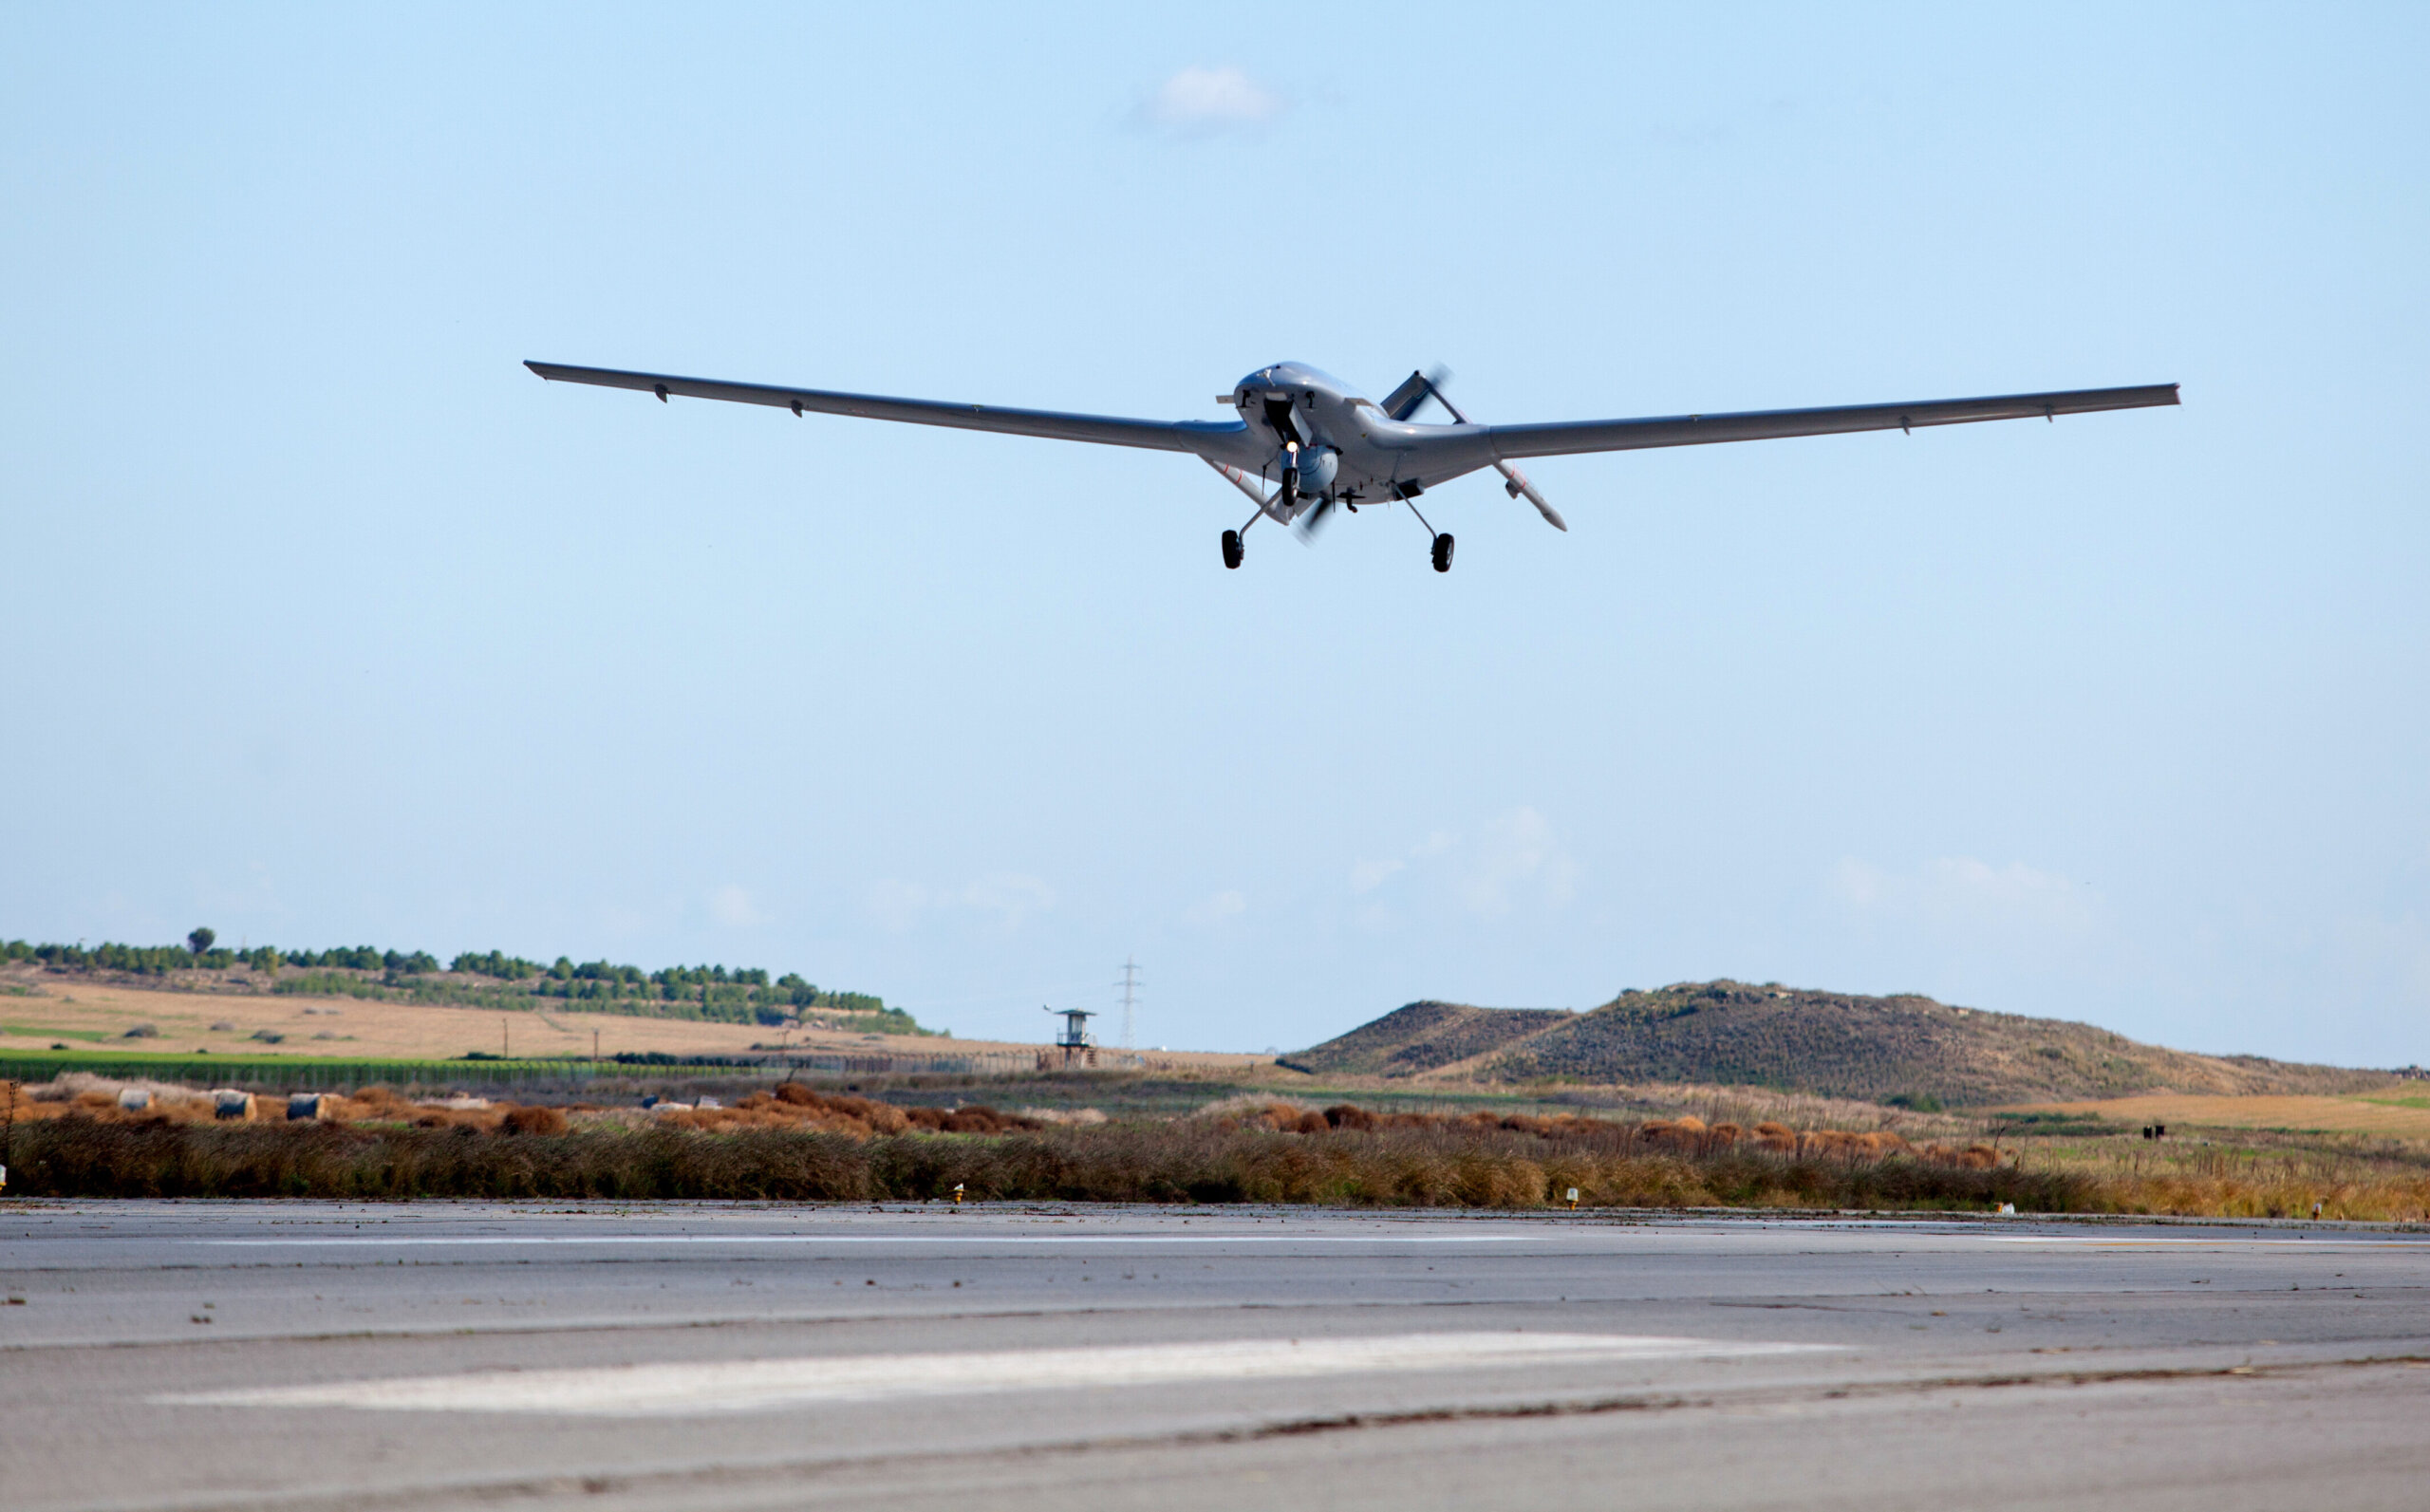 The Bayraktar TB2 drone is pictured flying on December 16, 2019 at Gecitkale Airport in Famagusta in the self-proclaimed Turkish Republic of Northern Cyprus